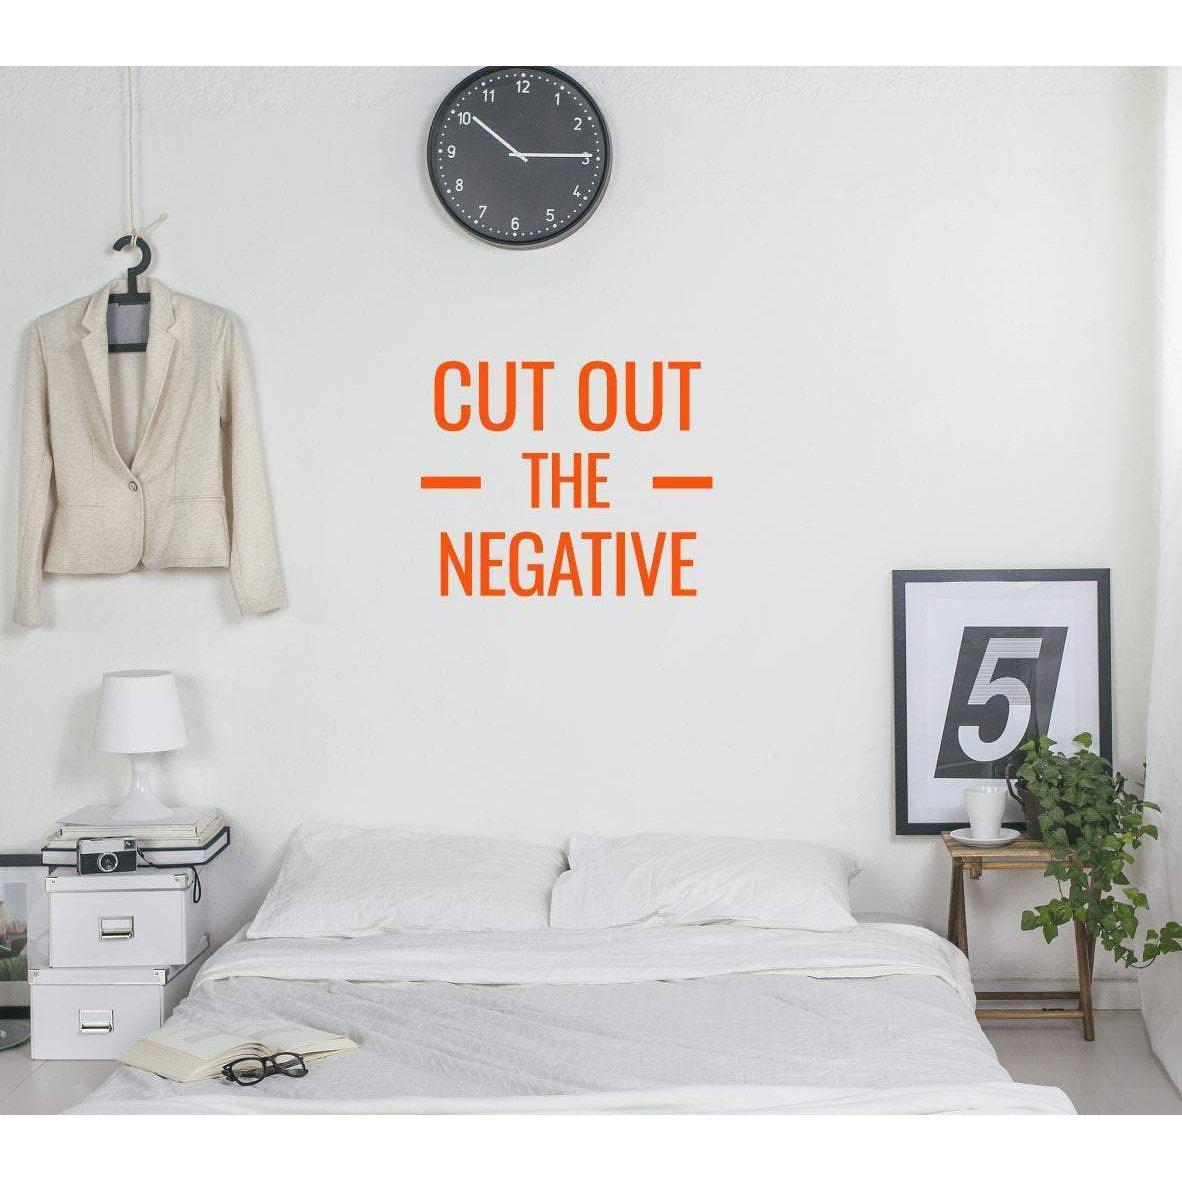 Cut Out The Negative Motivational Wall Sticker Quote